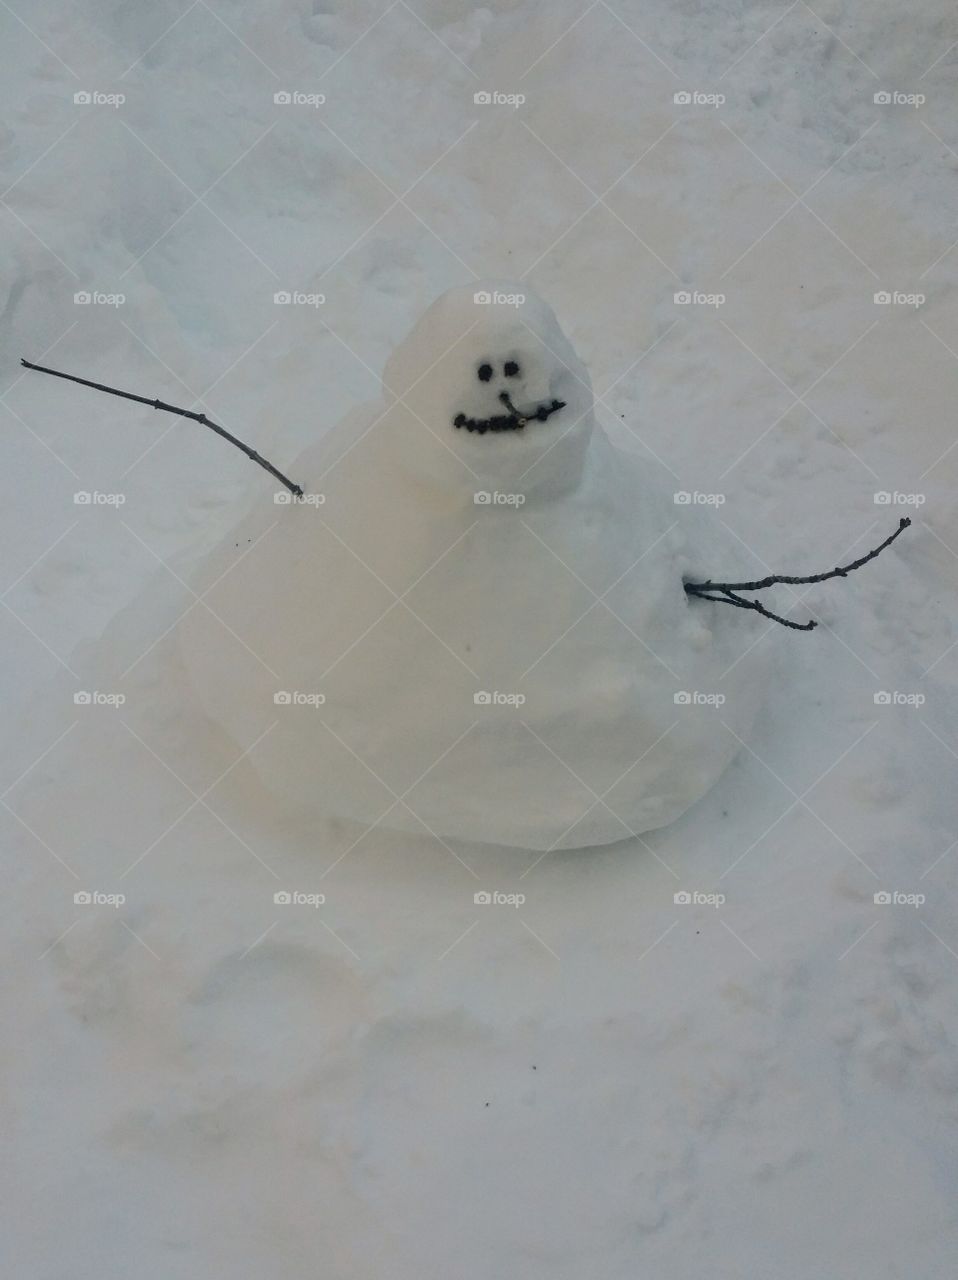 Funny little snowman with arms and face made with branches and surrounded with snow